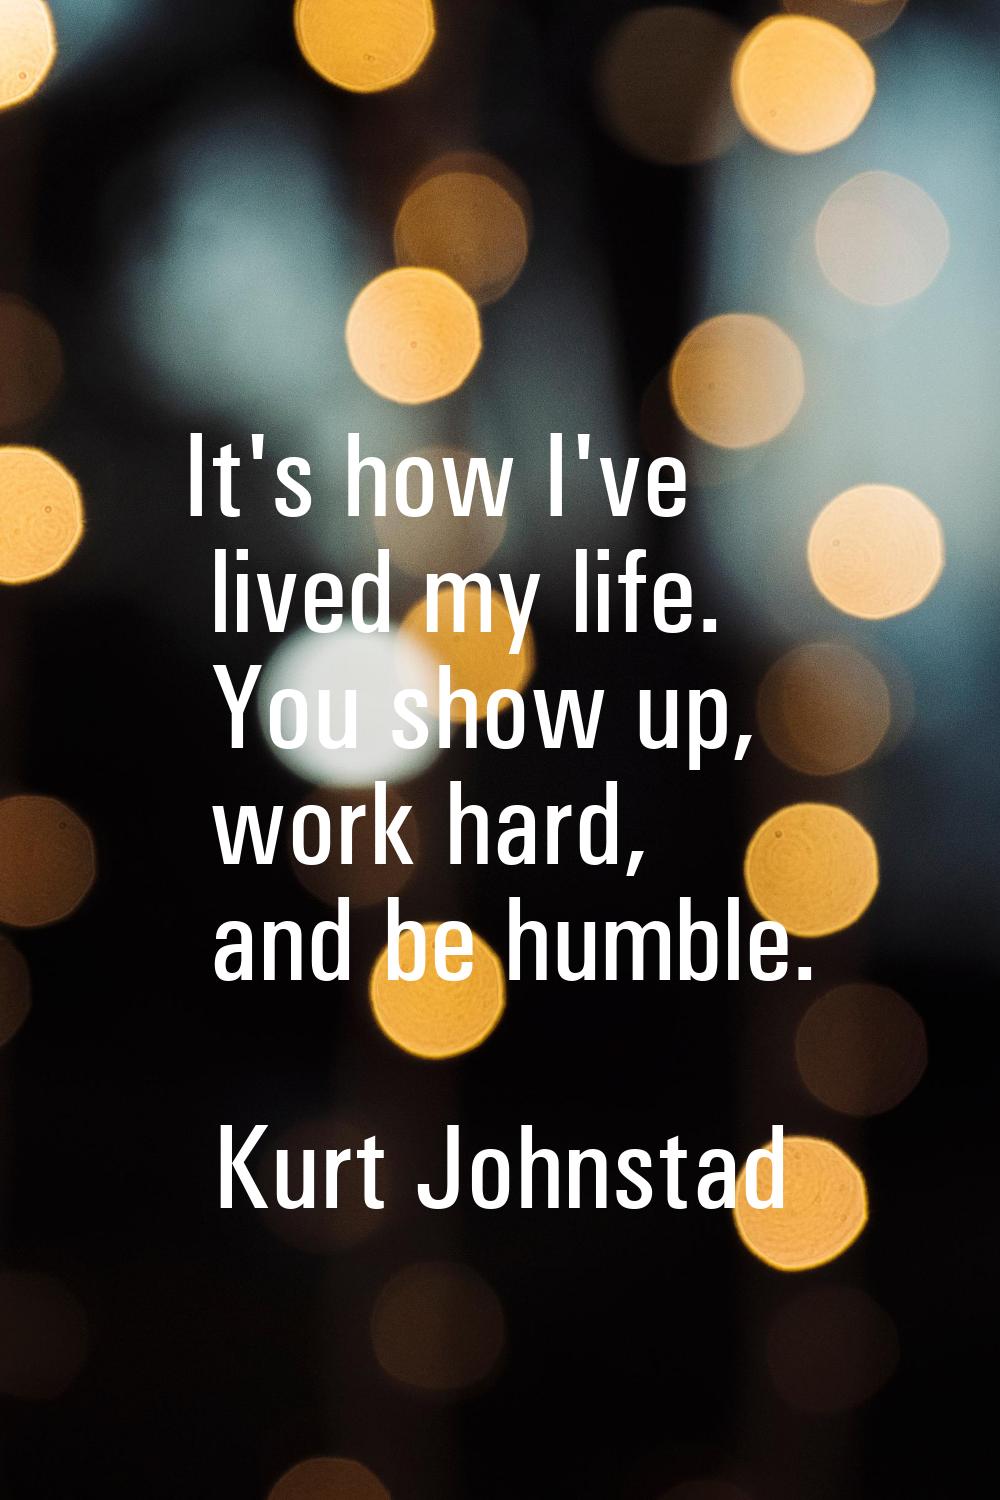 It's how I've lived my life. You show up, work hard, and be humble.